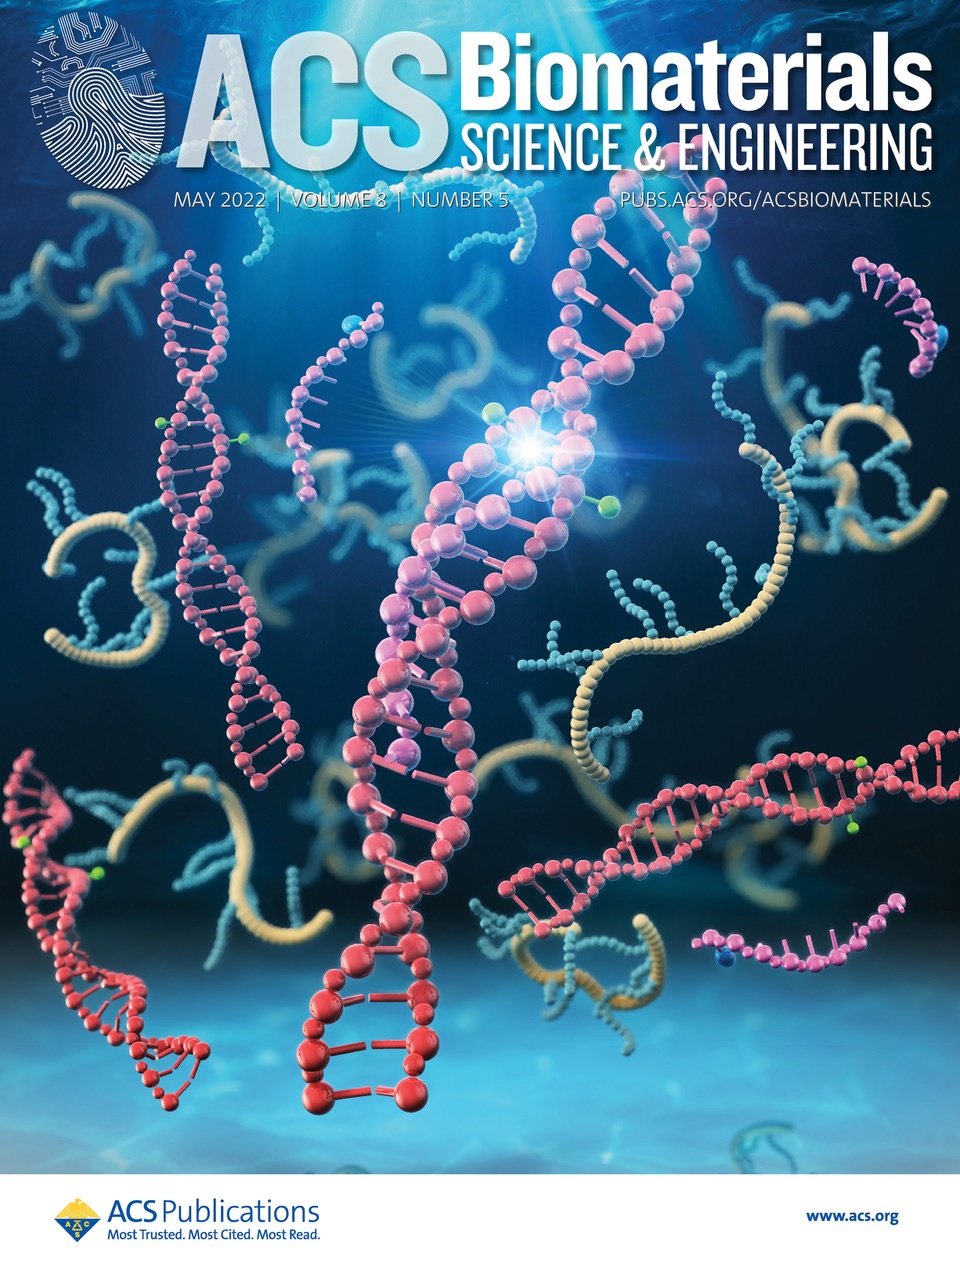 Professor Asako Yamayoshi and Fellow researchers were featured on the cover of ACS Biomaterials Science & Engineering